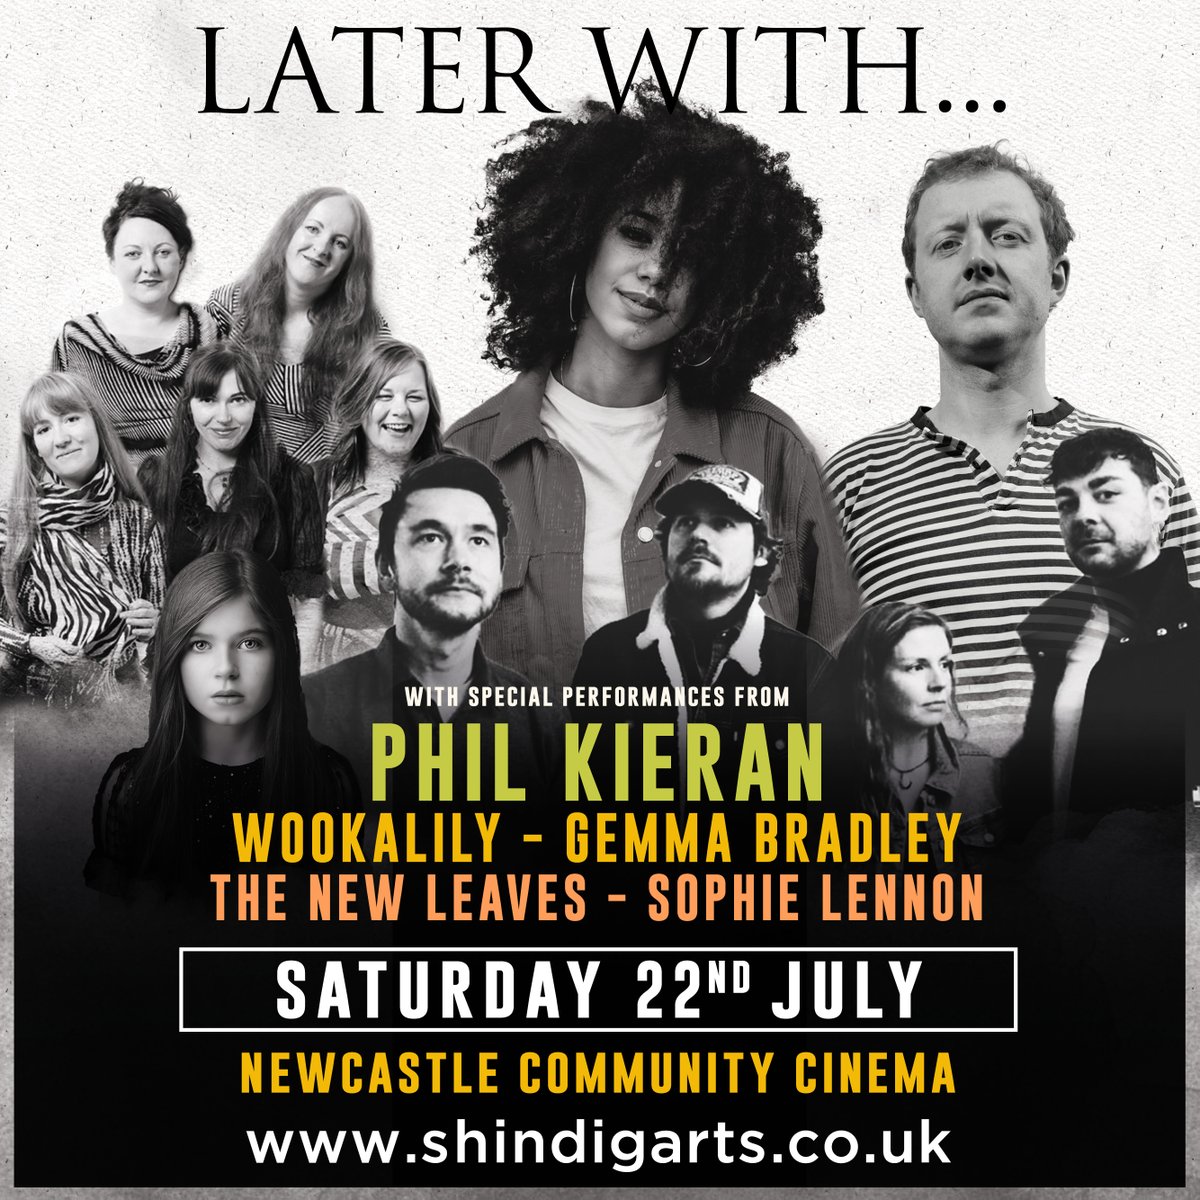 I’ll be performing tracks from my new album ‘The Strand Cinema’ at this. It’s an intimate live performance music show featuring an eclectic mix of musical artists 
I’ll be joined with @Gemma_Bradley_ , @Wookalily , The New Leaves & Sophie Lennon...  newcastlecinema.org